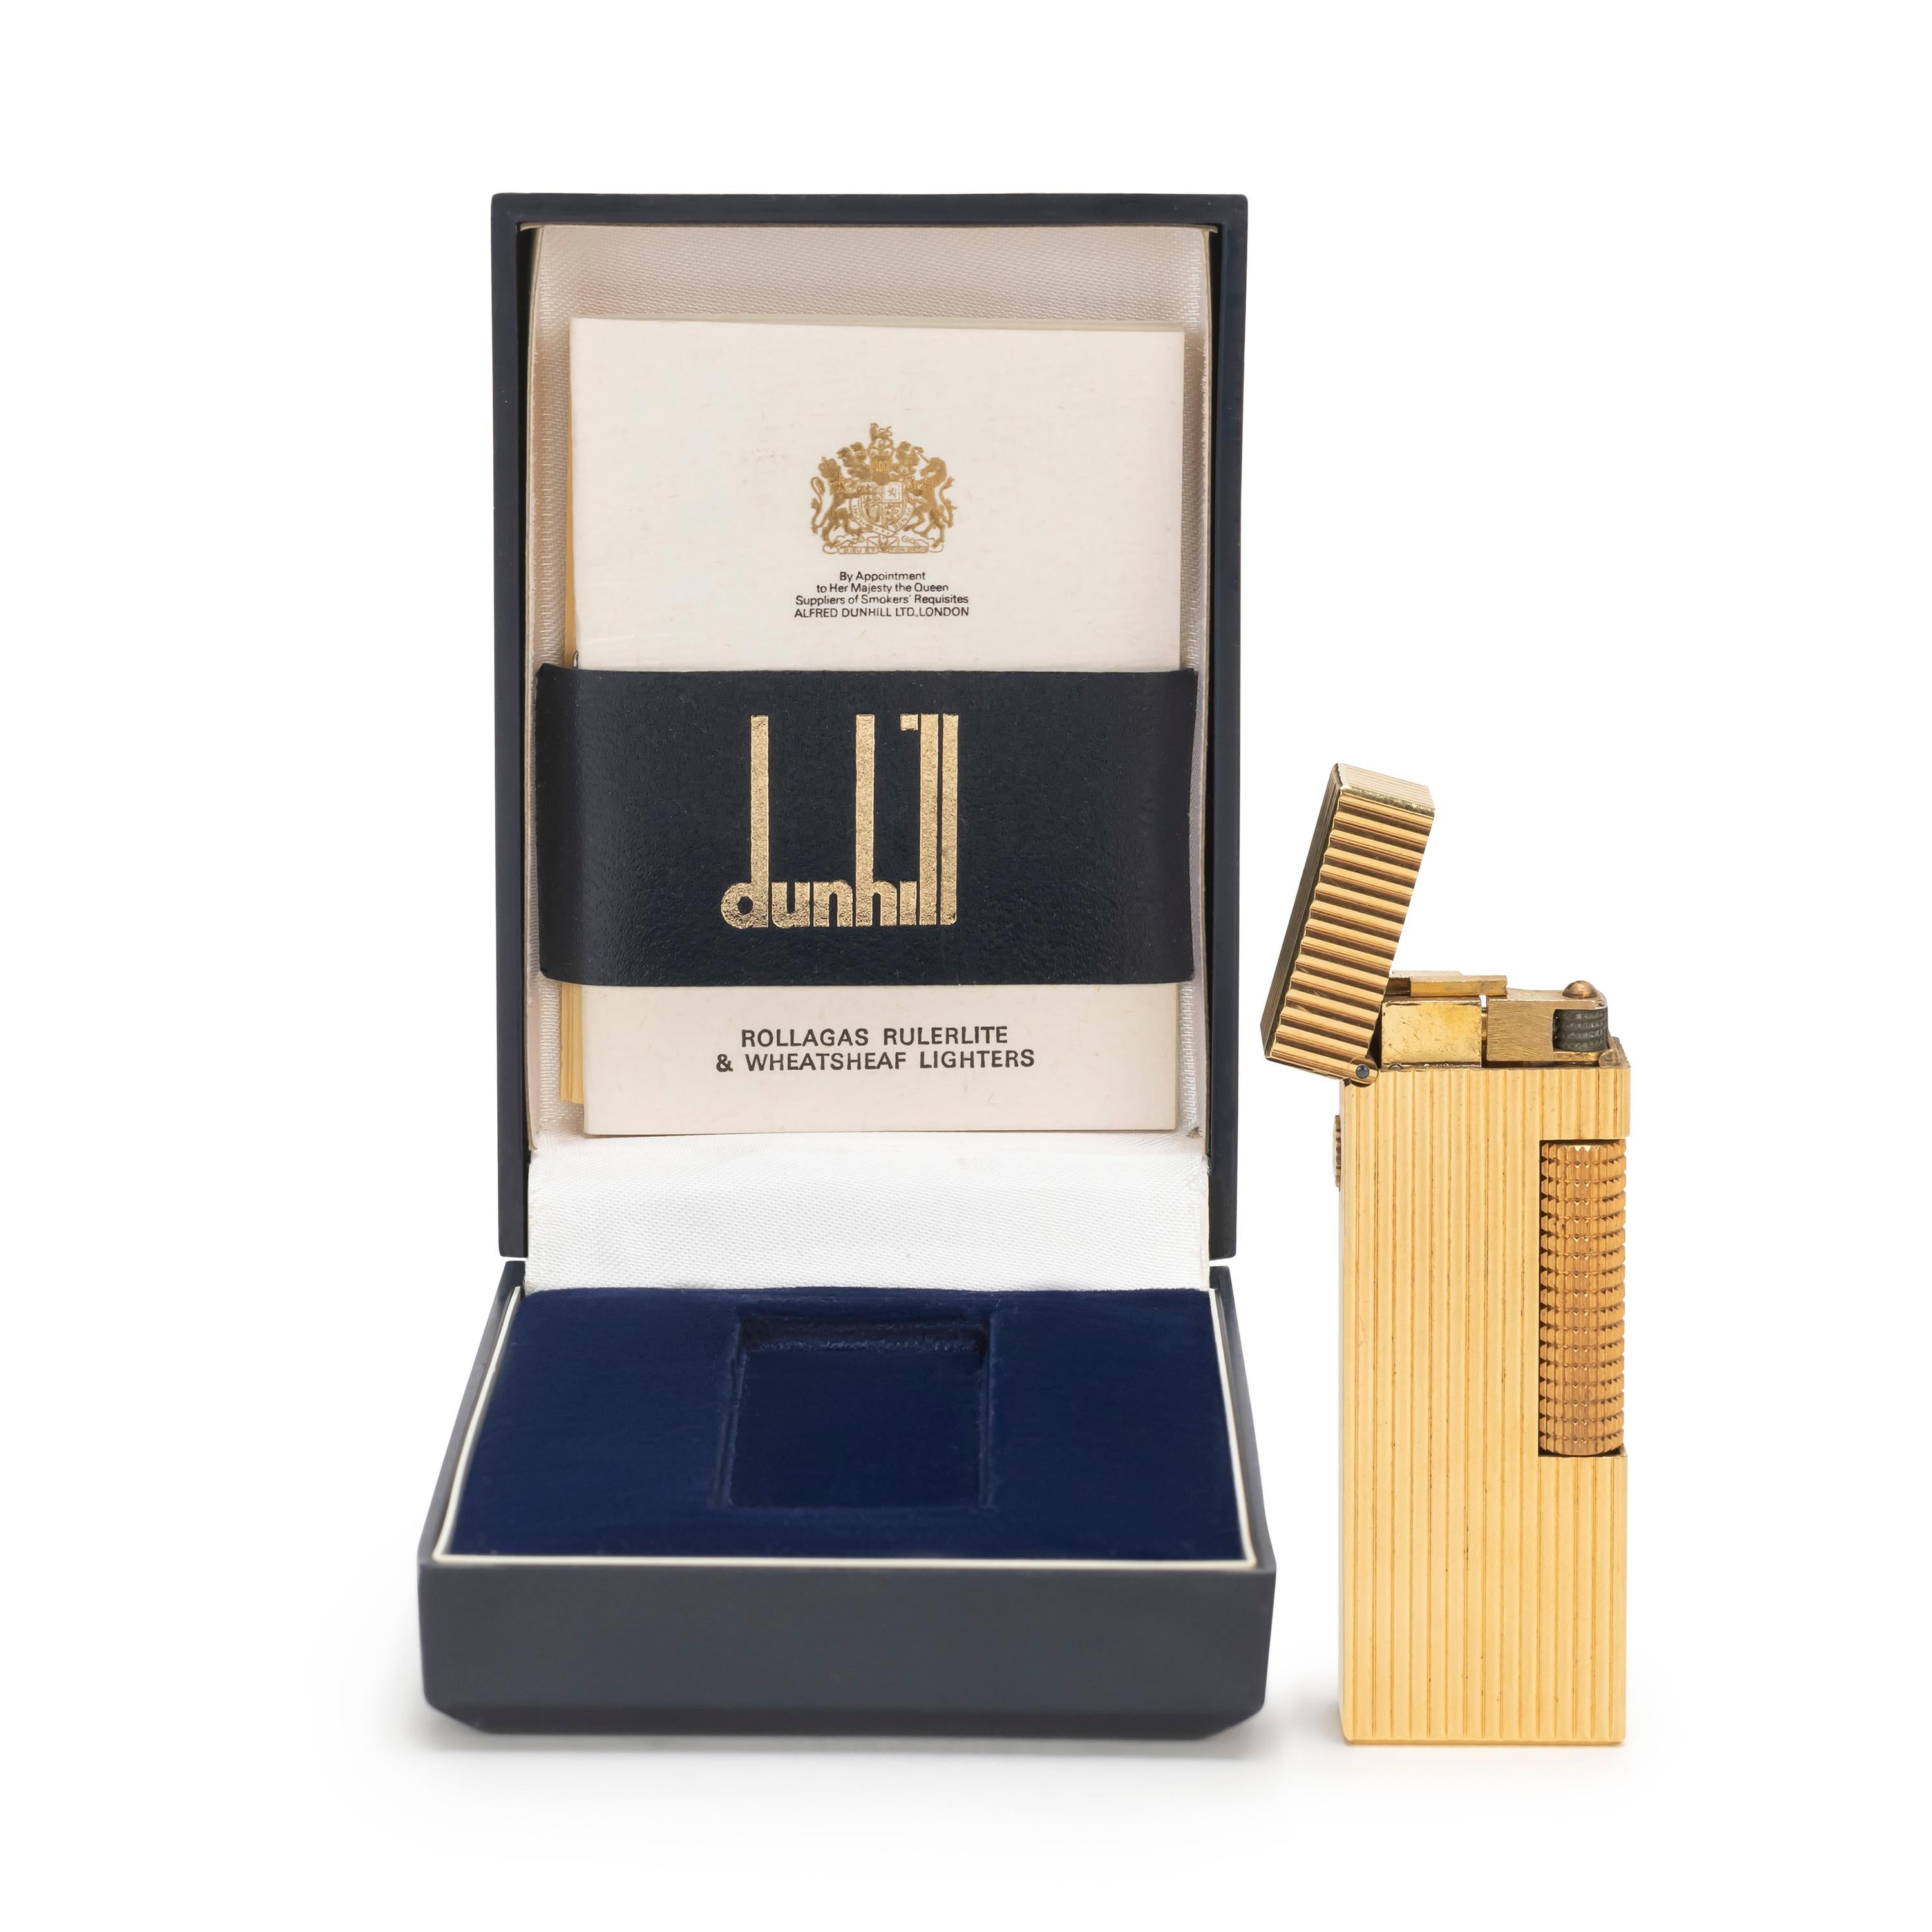 Rare Iconic Vintage and Elegant Dunhill Gold Swiss Made Lighter.
As seen in the James Bond film. 
Dunhill gold plated Swiss Made lighter In mint condition.
Works perfectly. 
Iconic and beautifully engineered piece in rare condition.
In original blue